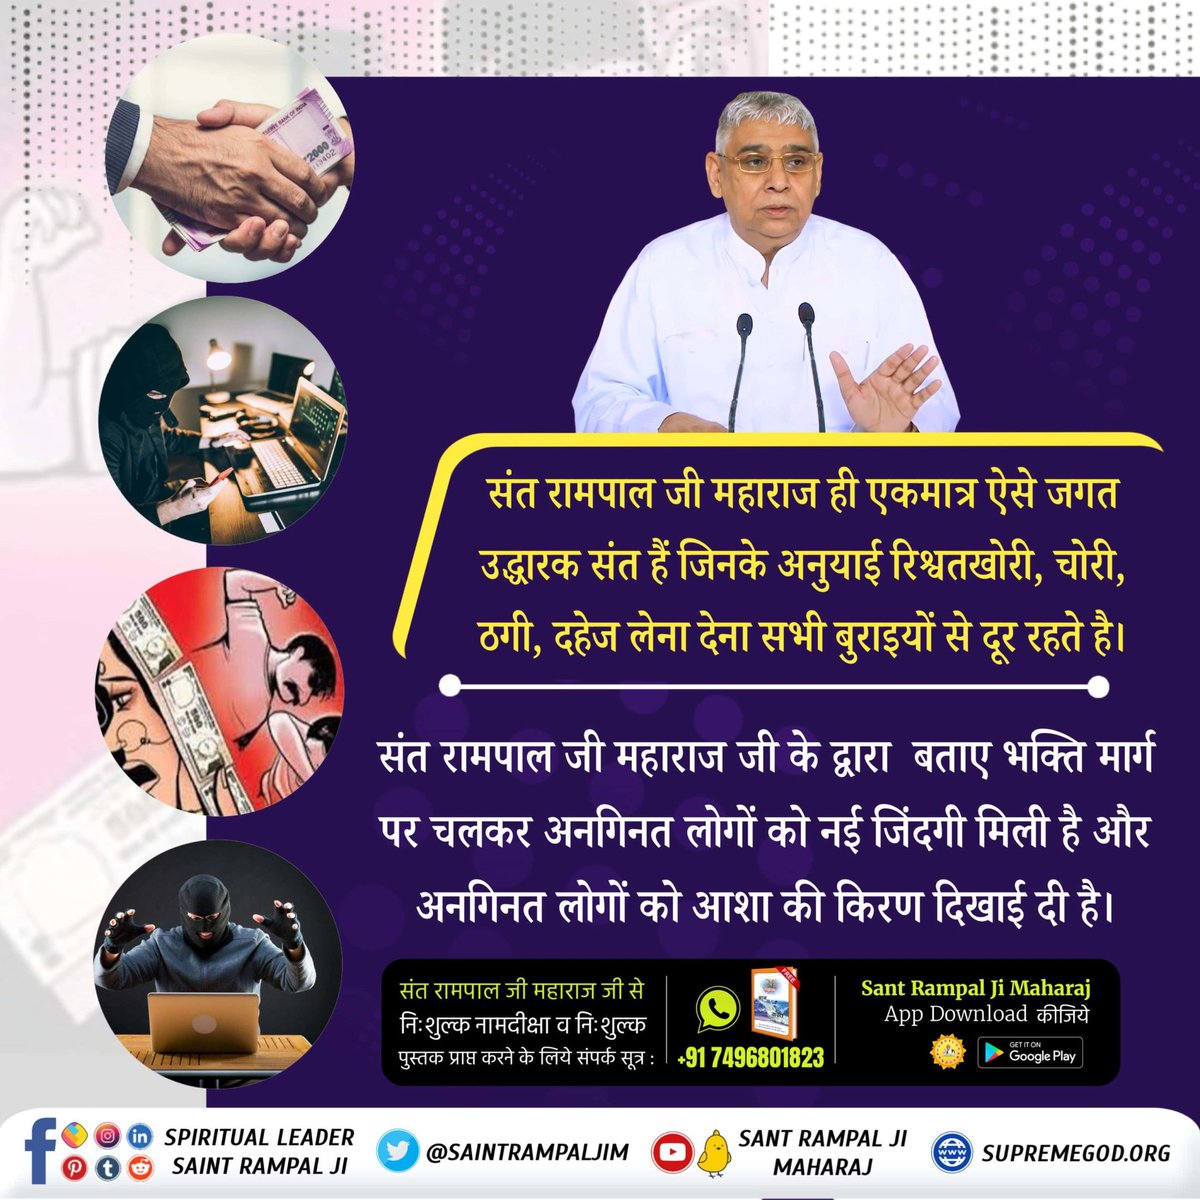 #जगत_उद्धारक_संत_रामपालजी The true knowledge and true mantras given by Sant Rampal Ji Maharaj have the power to change your mind such that; even if you are a drug addict or alcoholic or chain smoker, you will not feel like doing that again. Saviour Of The World